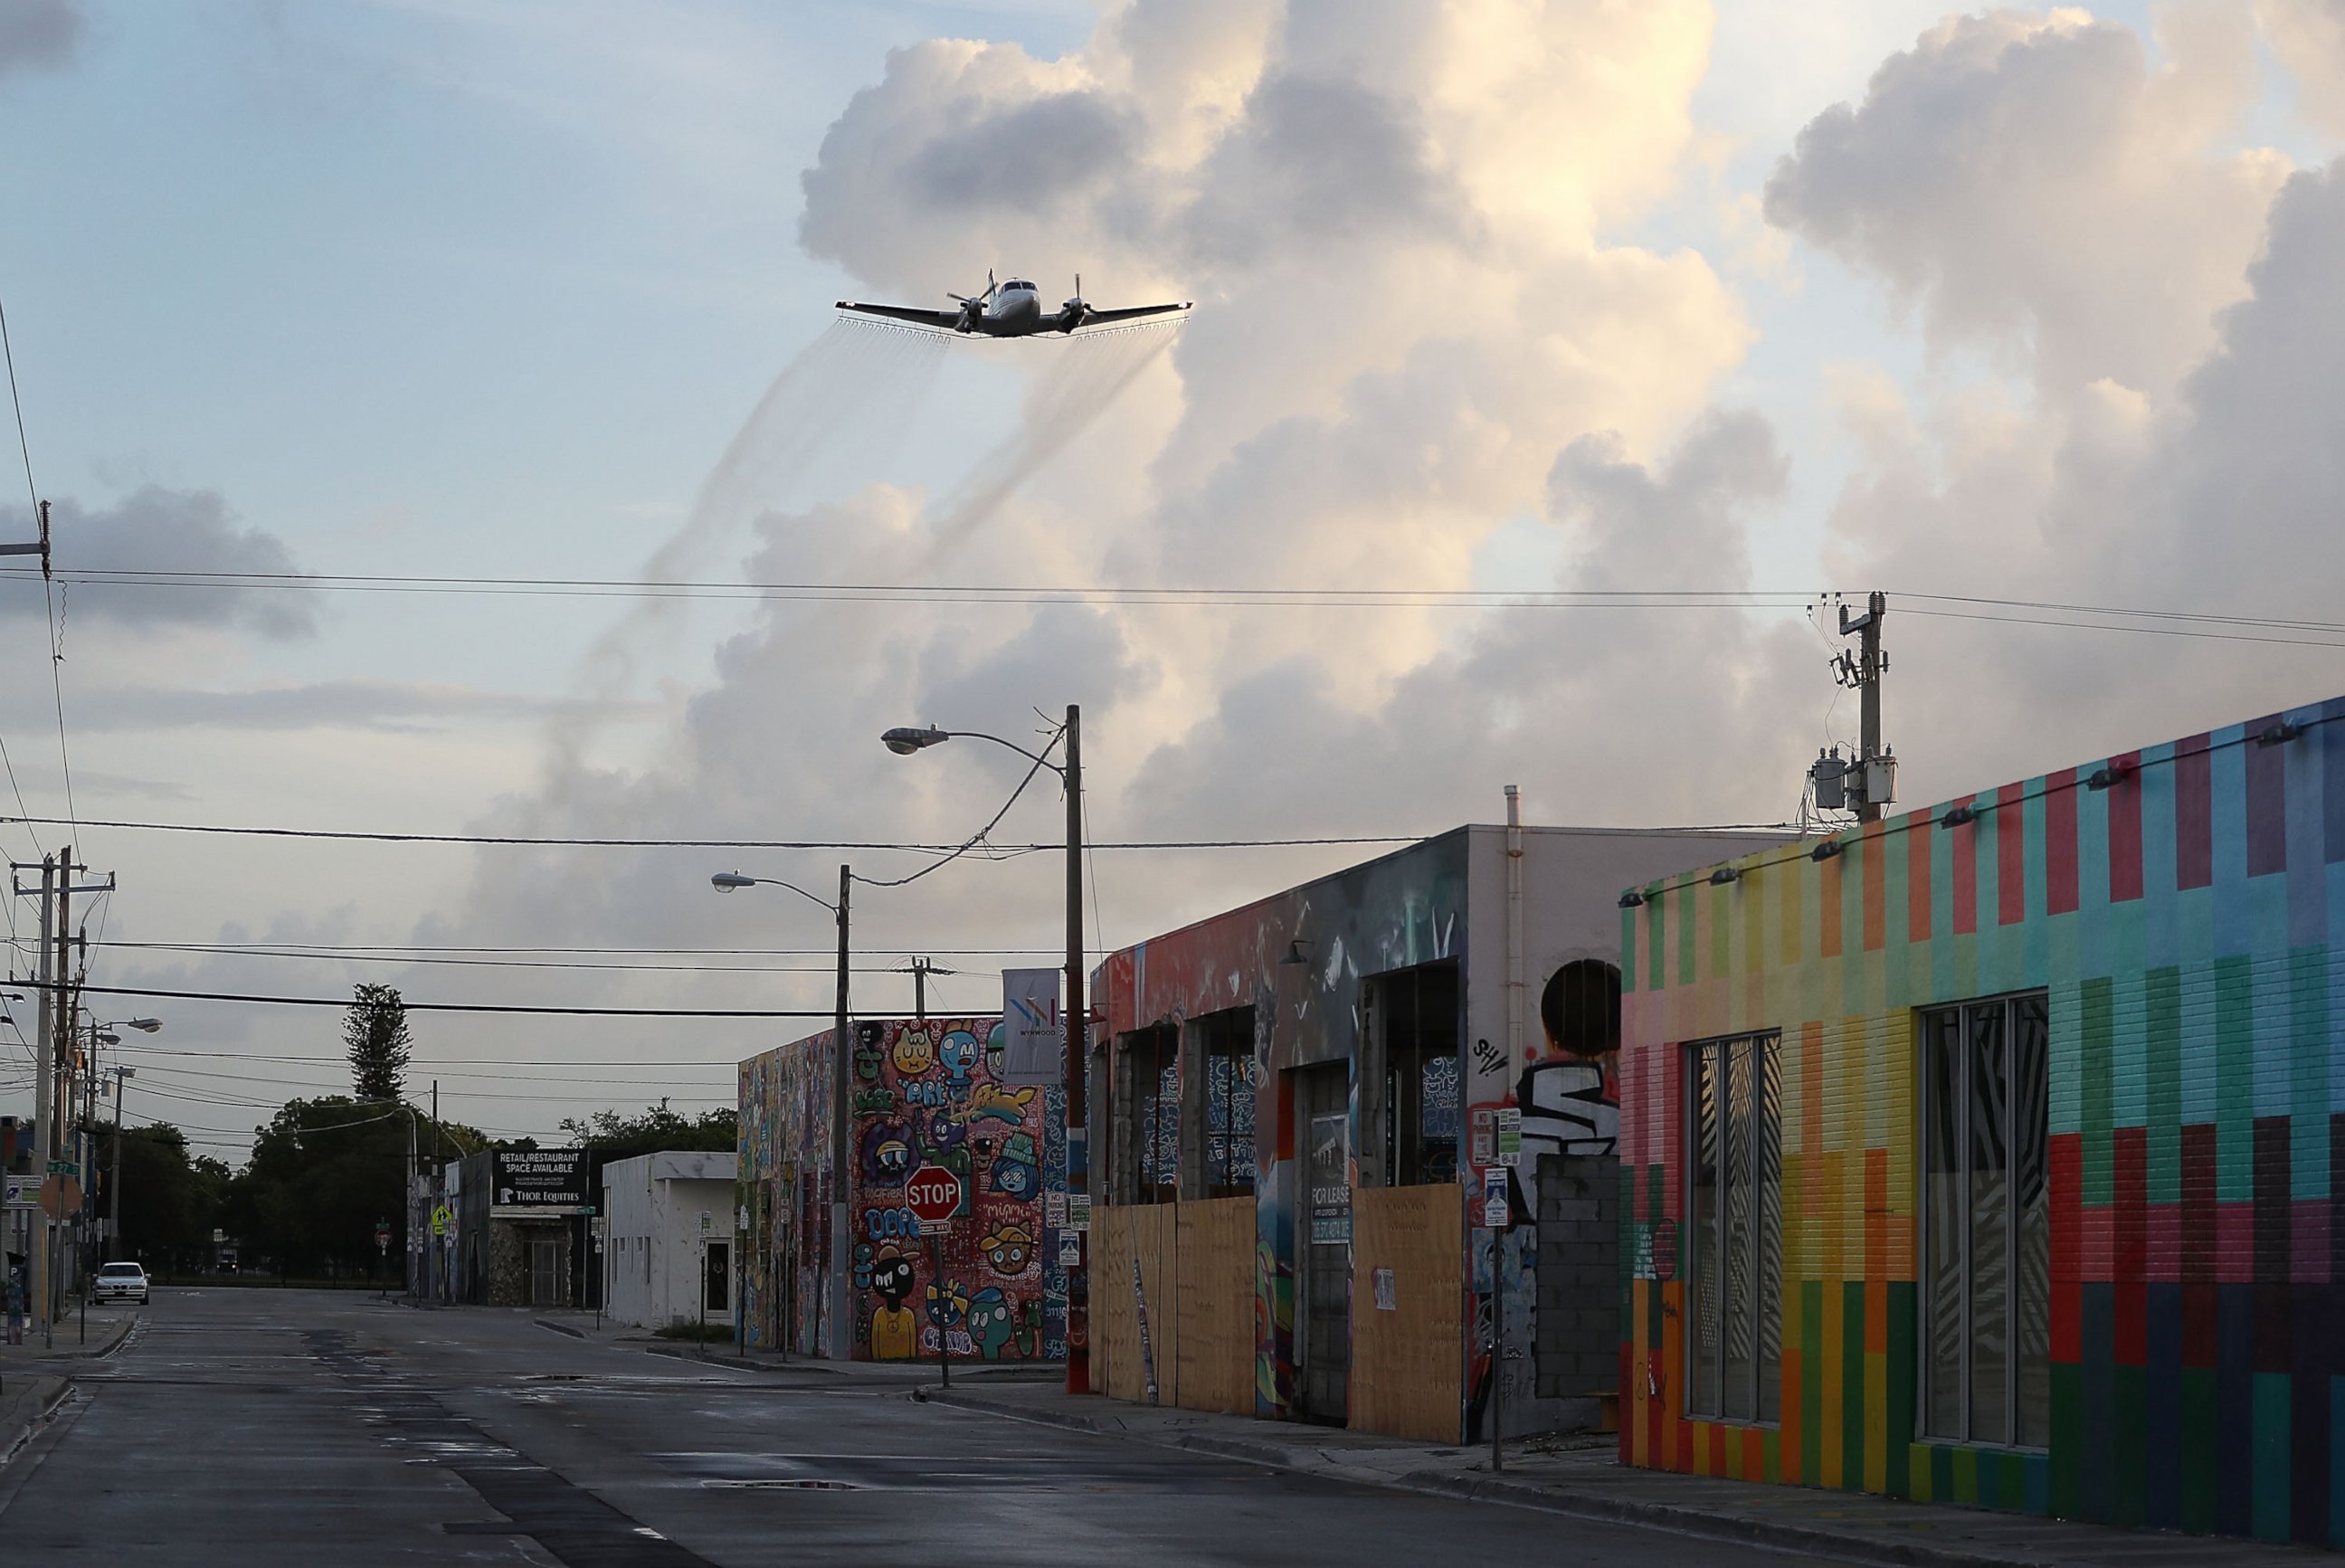 PHOTO:  A plane sprays pesticide over the Wynwood neighborhood in the hope of controlling and reducing the number of mosquitos, some of which may be capable of spreading the Zika virus